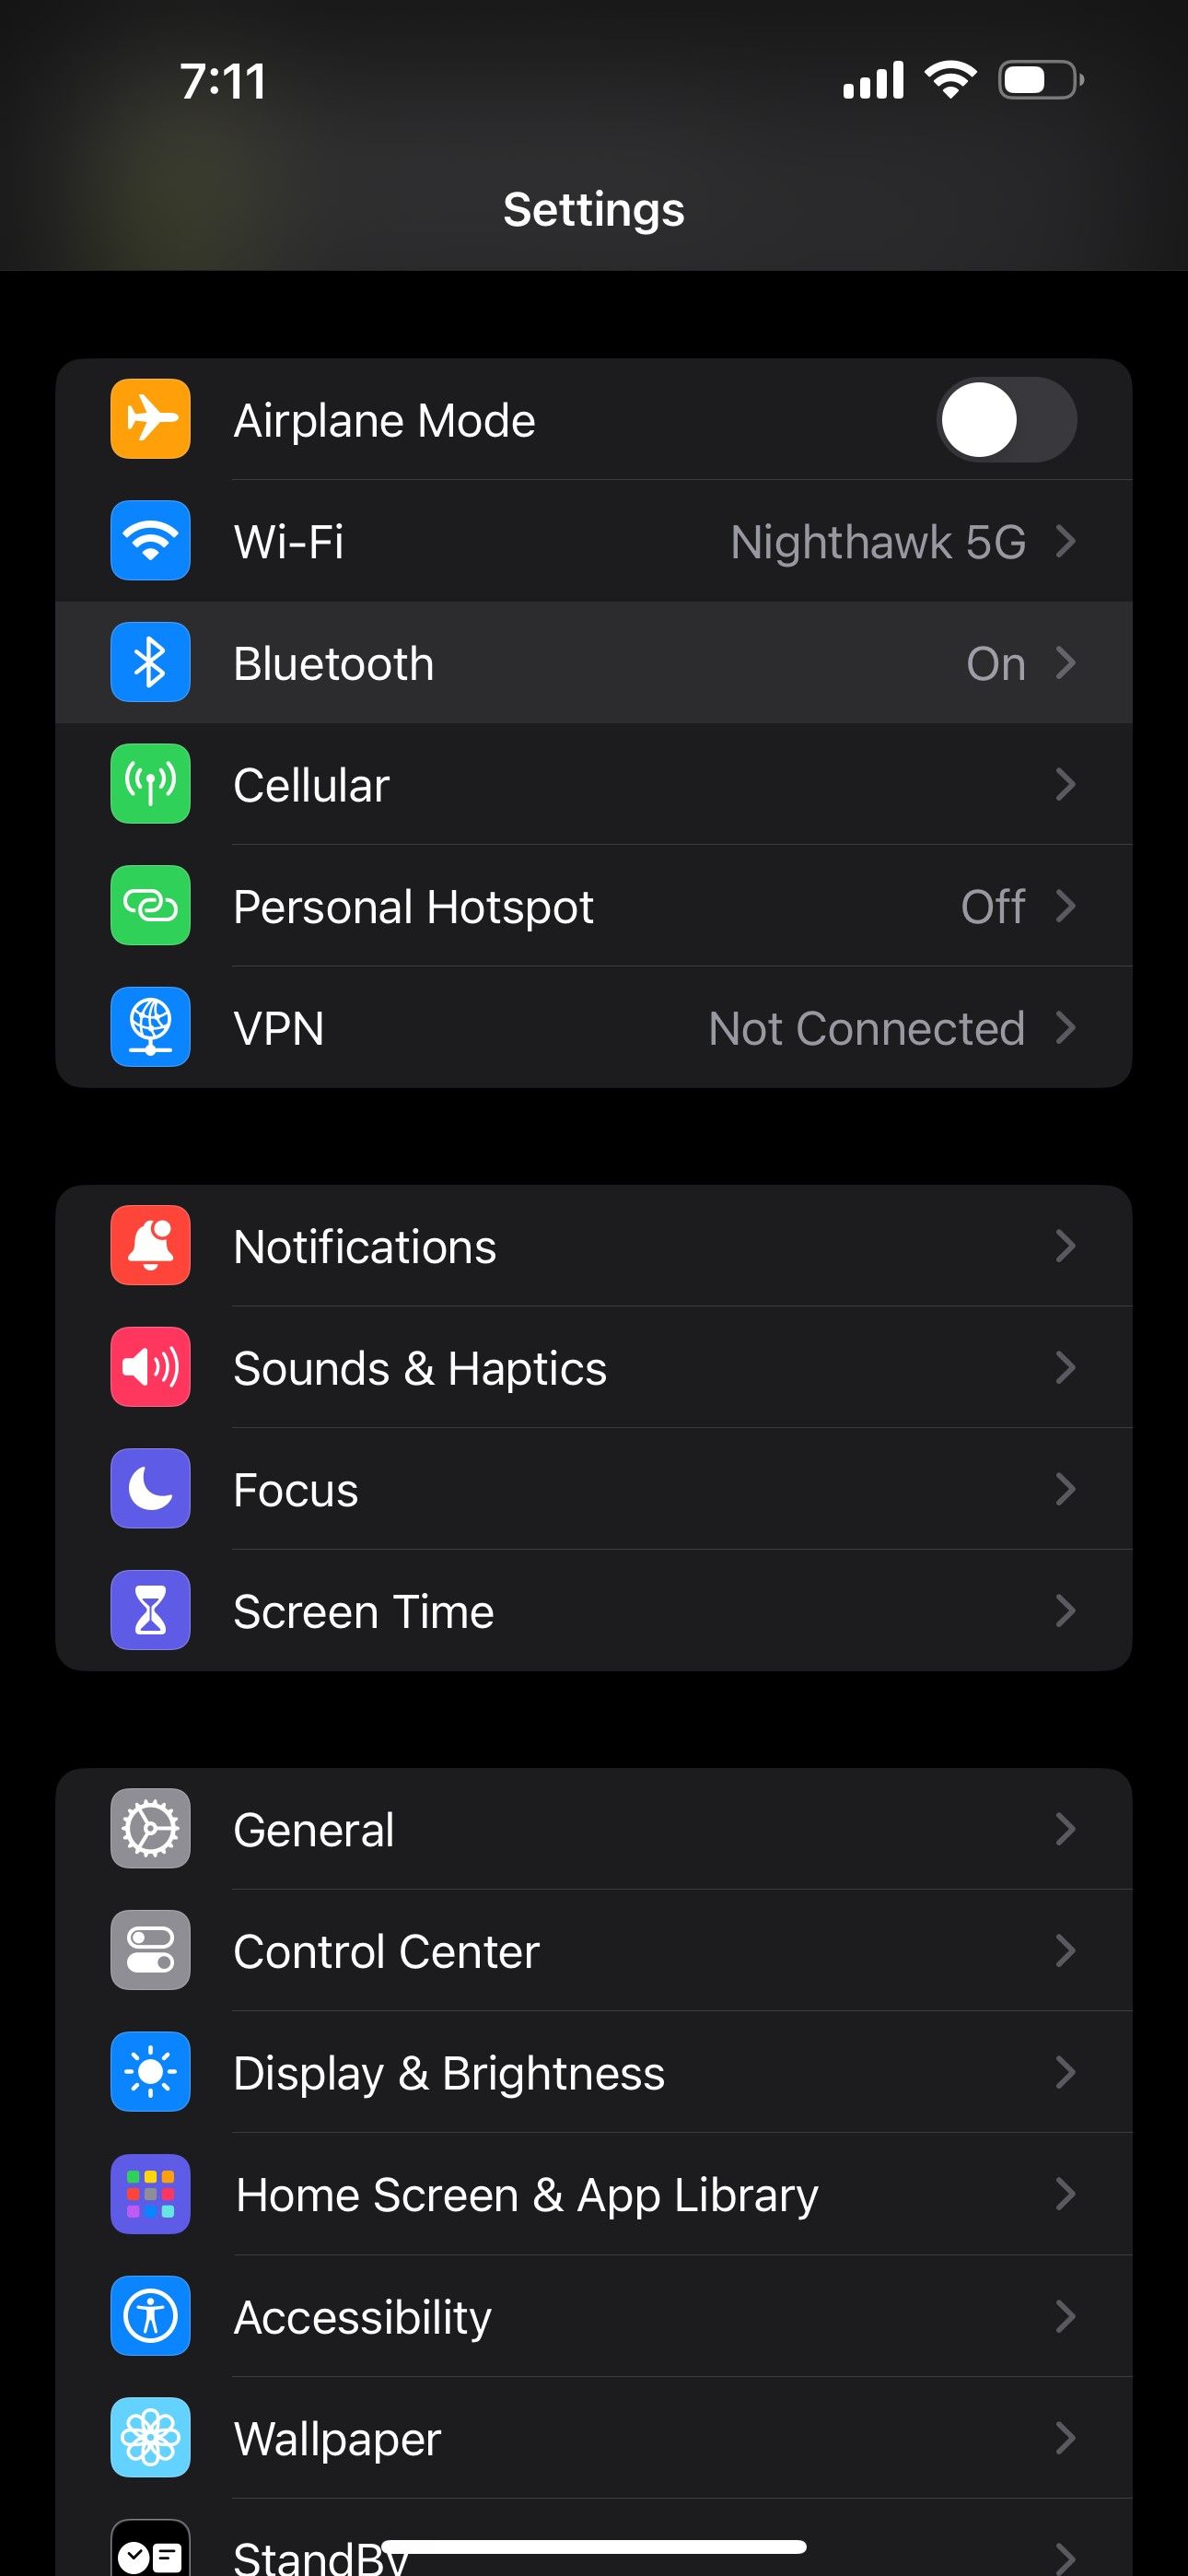 Settings screen in iPhone including Bluetooth